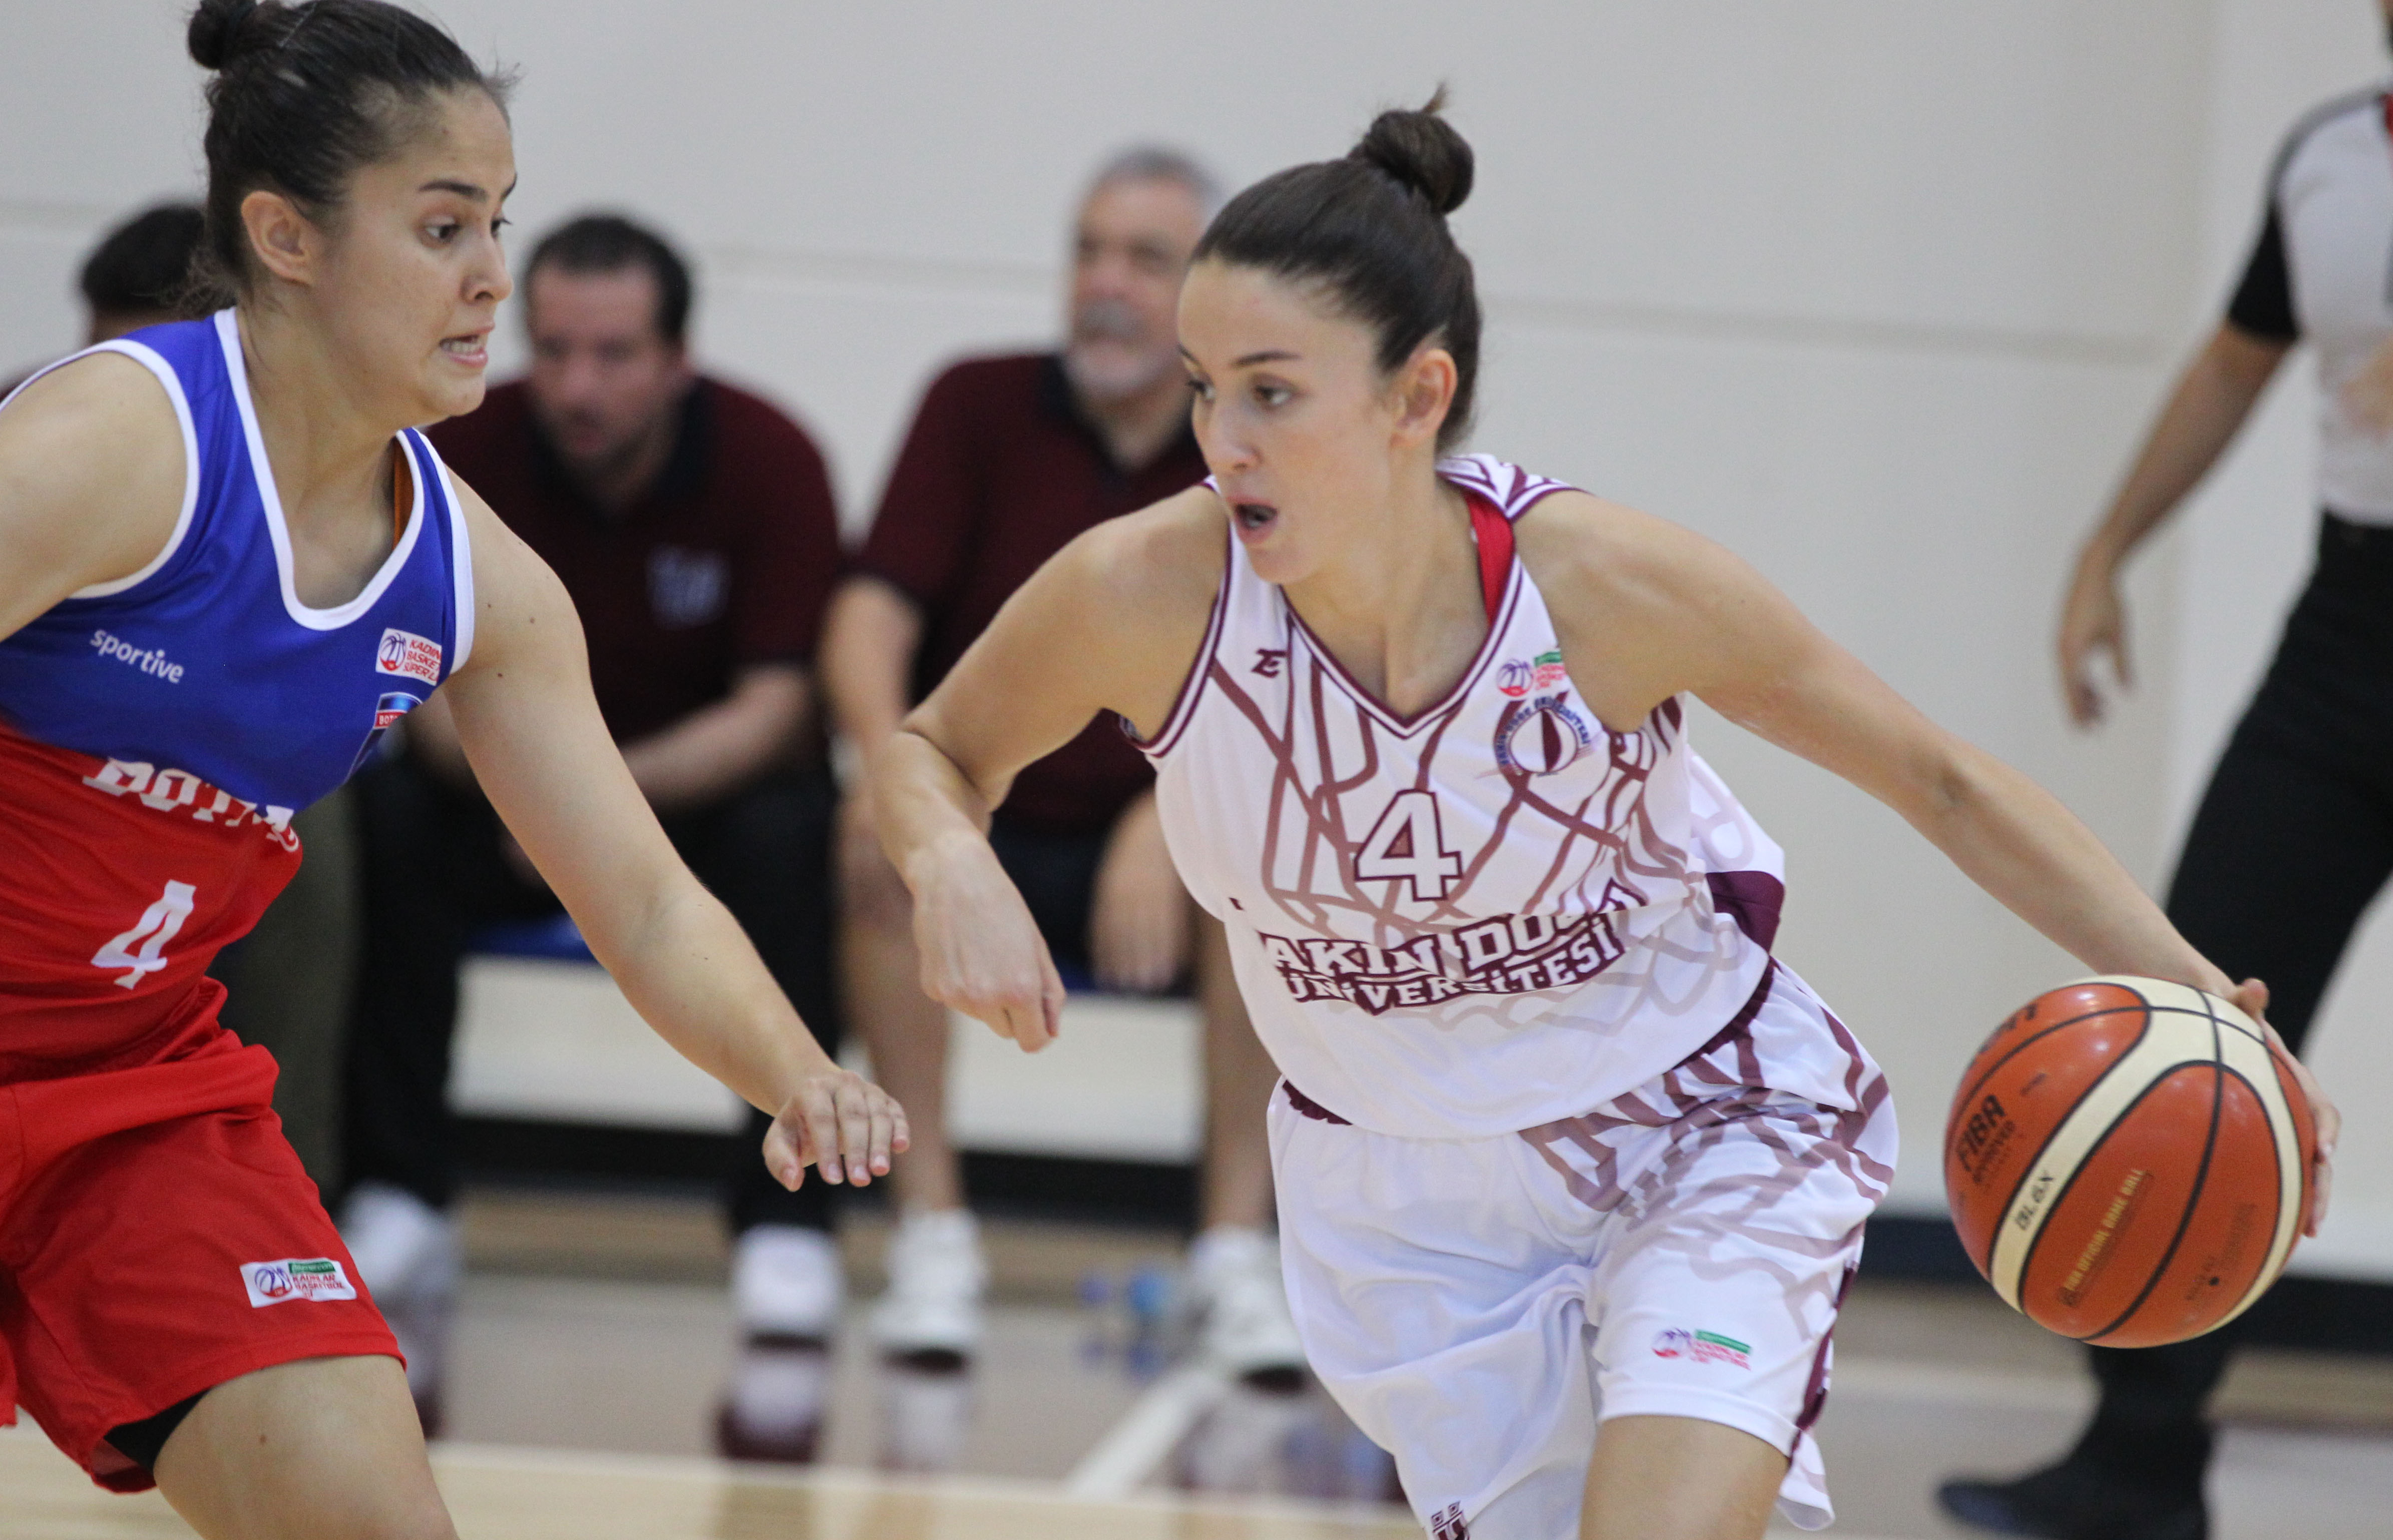 Near East University defeated Botaş with a score of 71-65